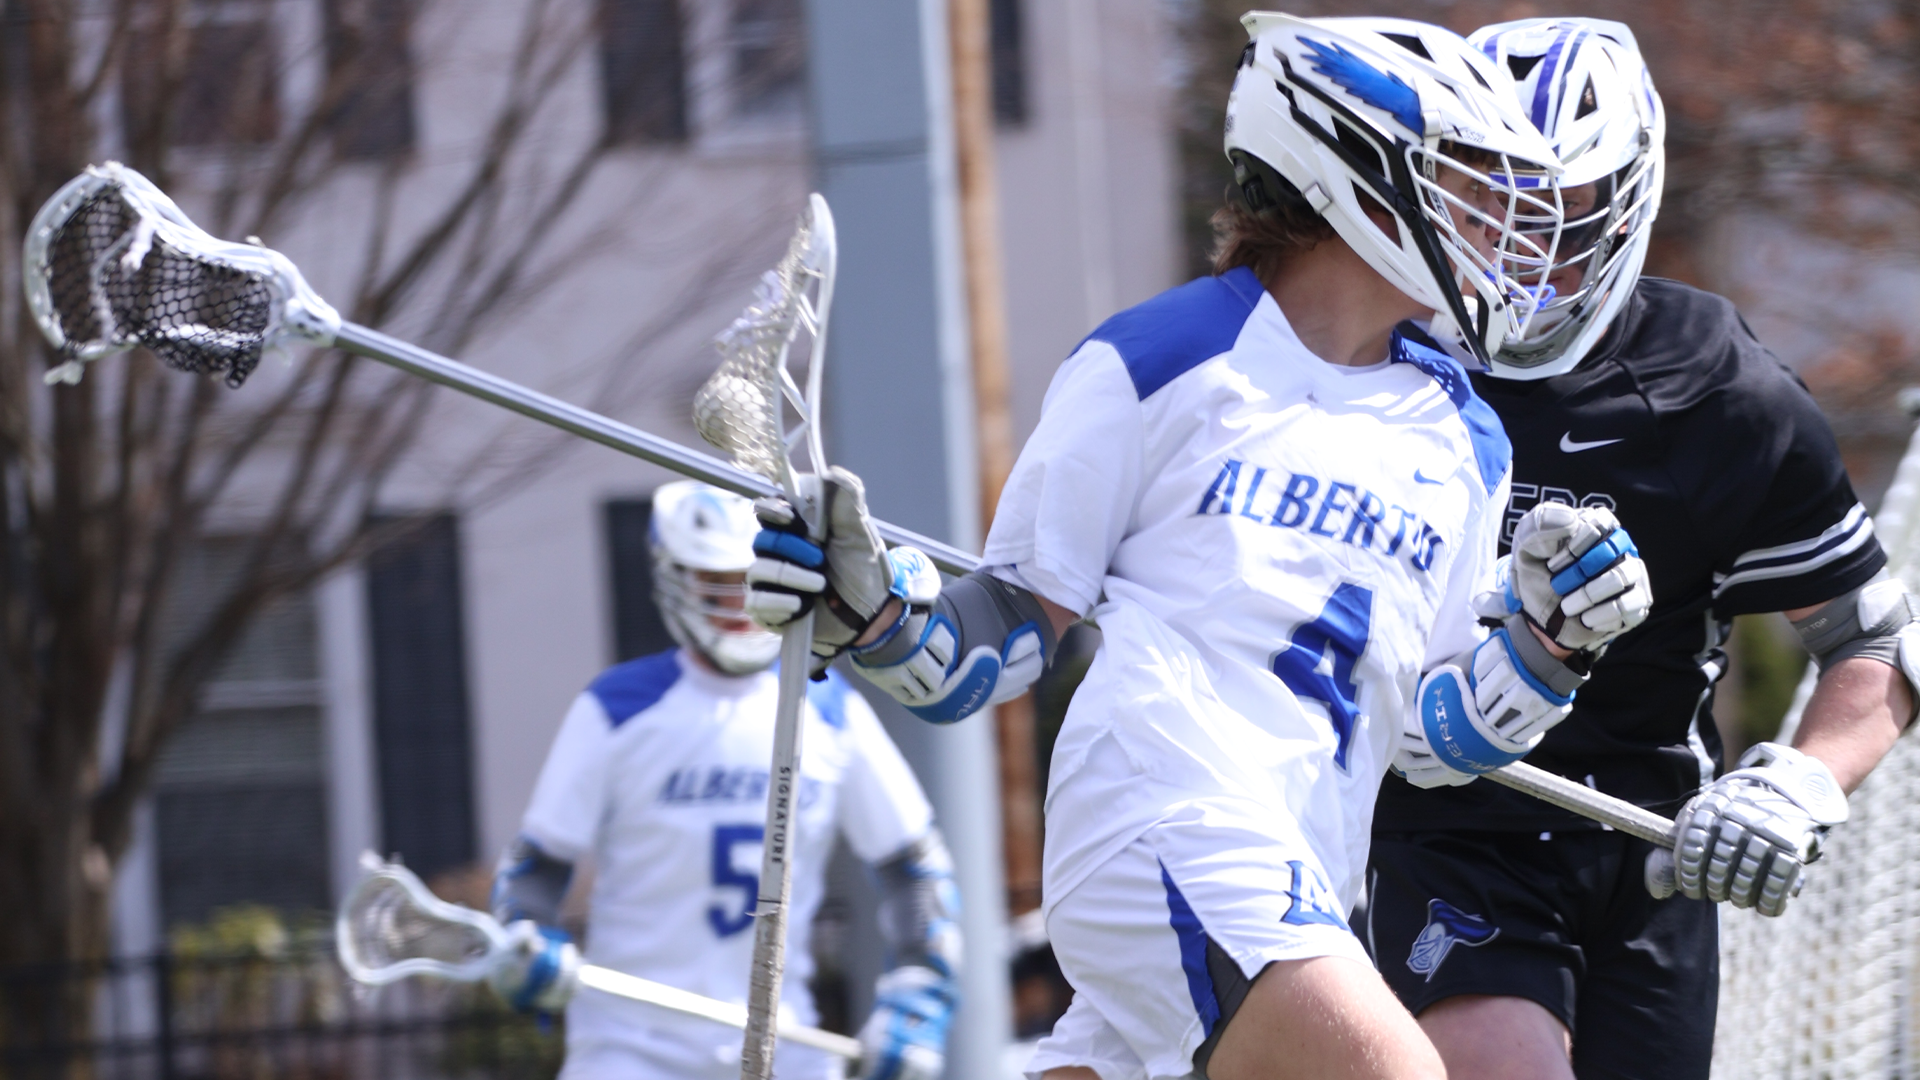 Strecker and Tremblay Each Score Twice in 13-7 Loss at Regis